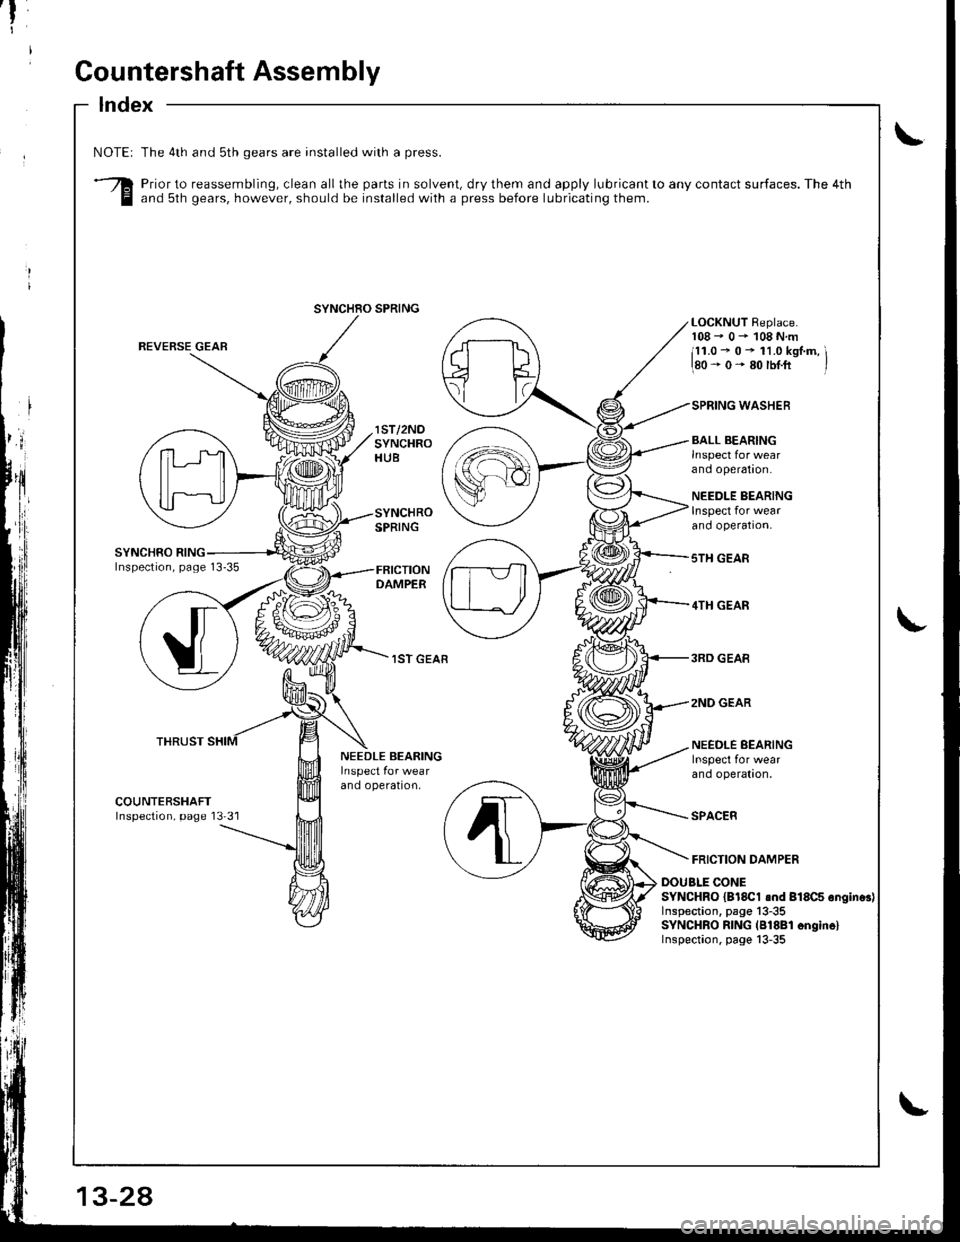 HONDA INTEGRA 1998 4.G Workshop Manual f
I
Gountershaft Assembly
Index
\NOTEI
3
The 4th and sth gears are installed with a press.
Prior to reassembling, clean all the parts in solvent, dry them and apply lubricant to any contact surfaces.